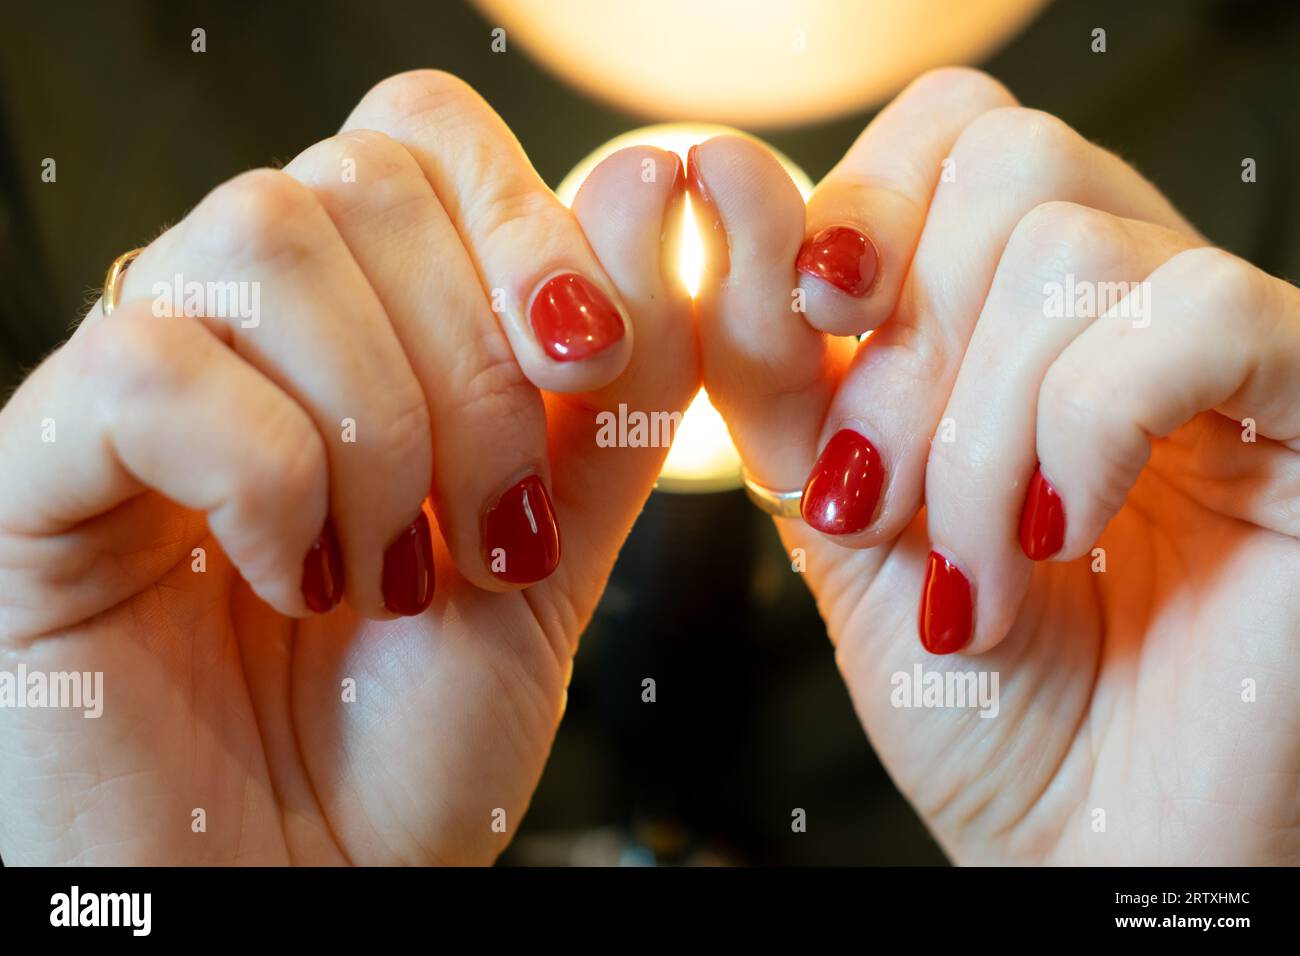 Test for clubbed fingers, The Schamroth window test. Woman pushing her thumb nails together showing bright gap and passing the test. Red nail varnish. Stock Photo